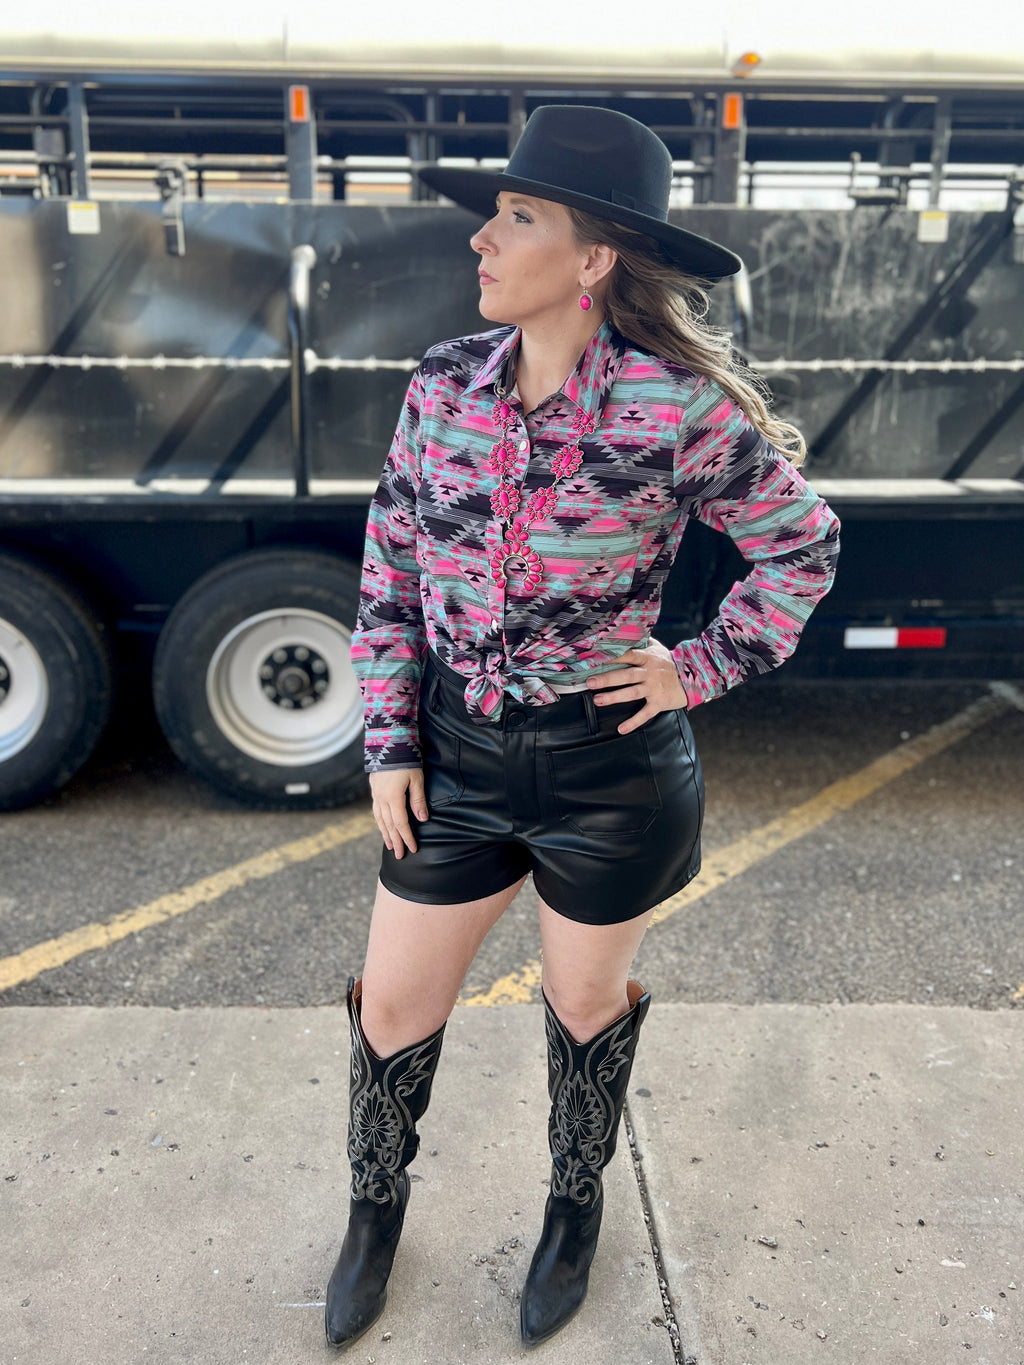 Women's western wear. Women's western button up. Women's western pearl snap. Western style. Turquoise button up. Aztec button up. Western long sleeve button up top. Women's rodeo wear. Rodeo style. Western outfit. Women's western boutique. Boutique. Online boutique. Small business. Woman owned.